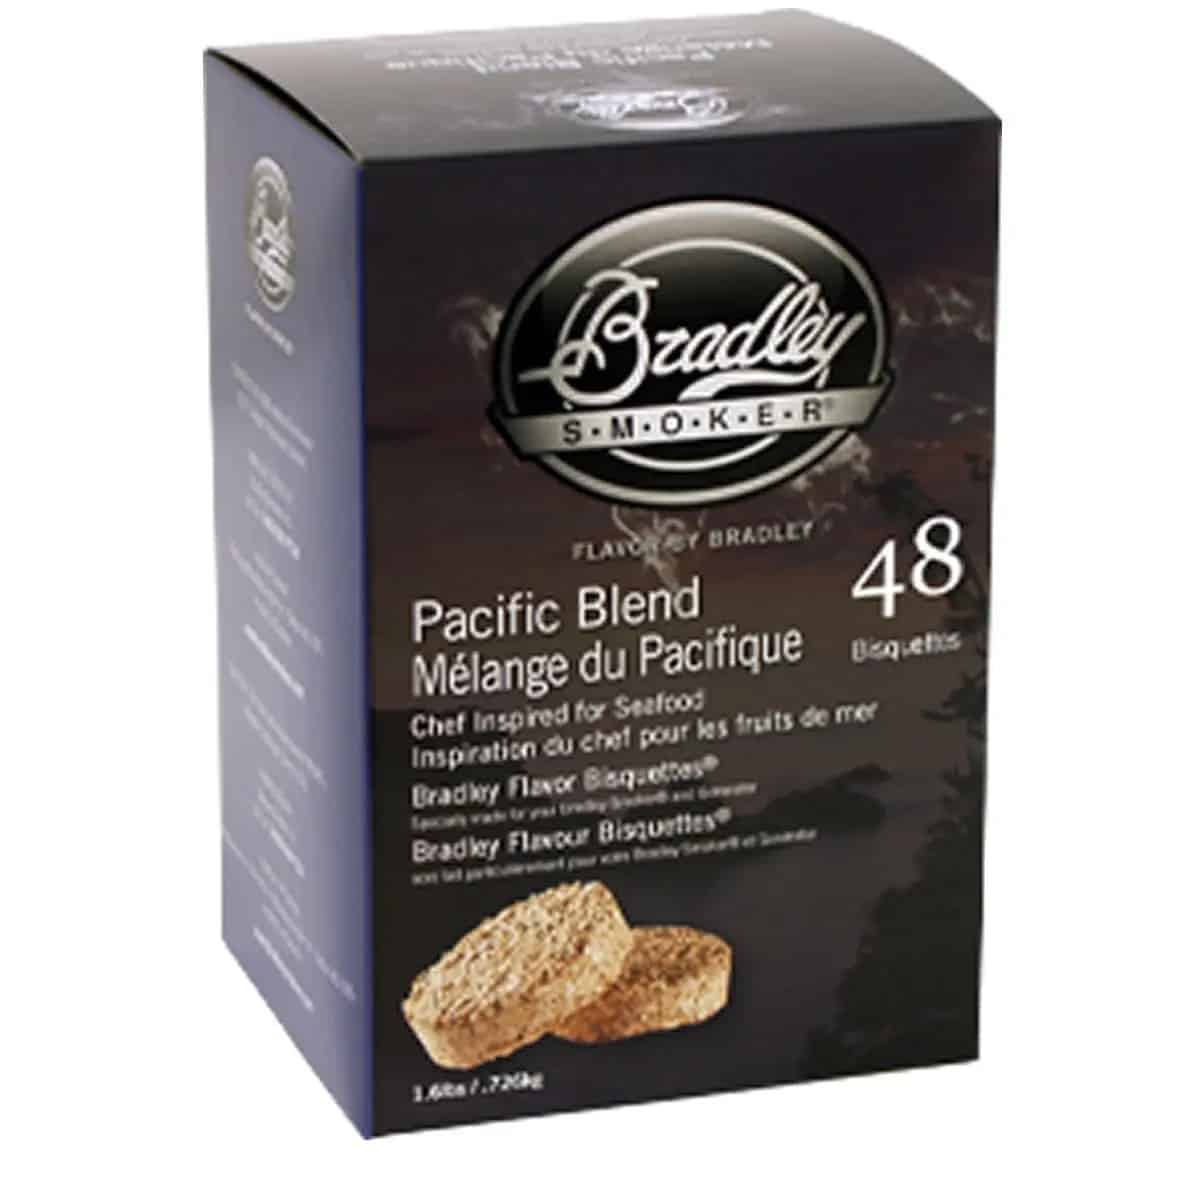 Smoker Flavour Bisquettes – Pacific Blend, 48 Pack